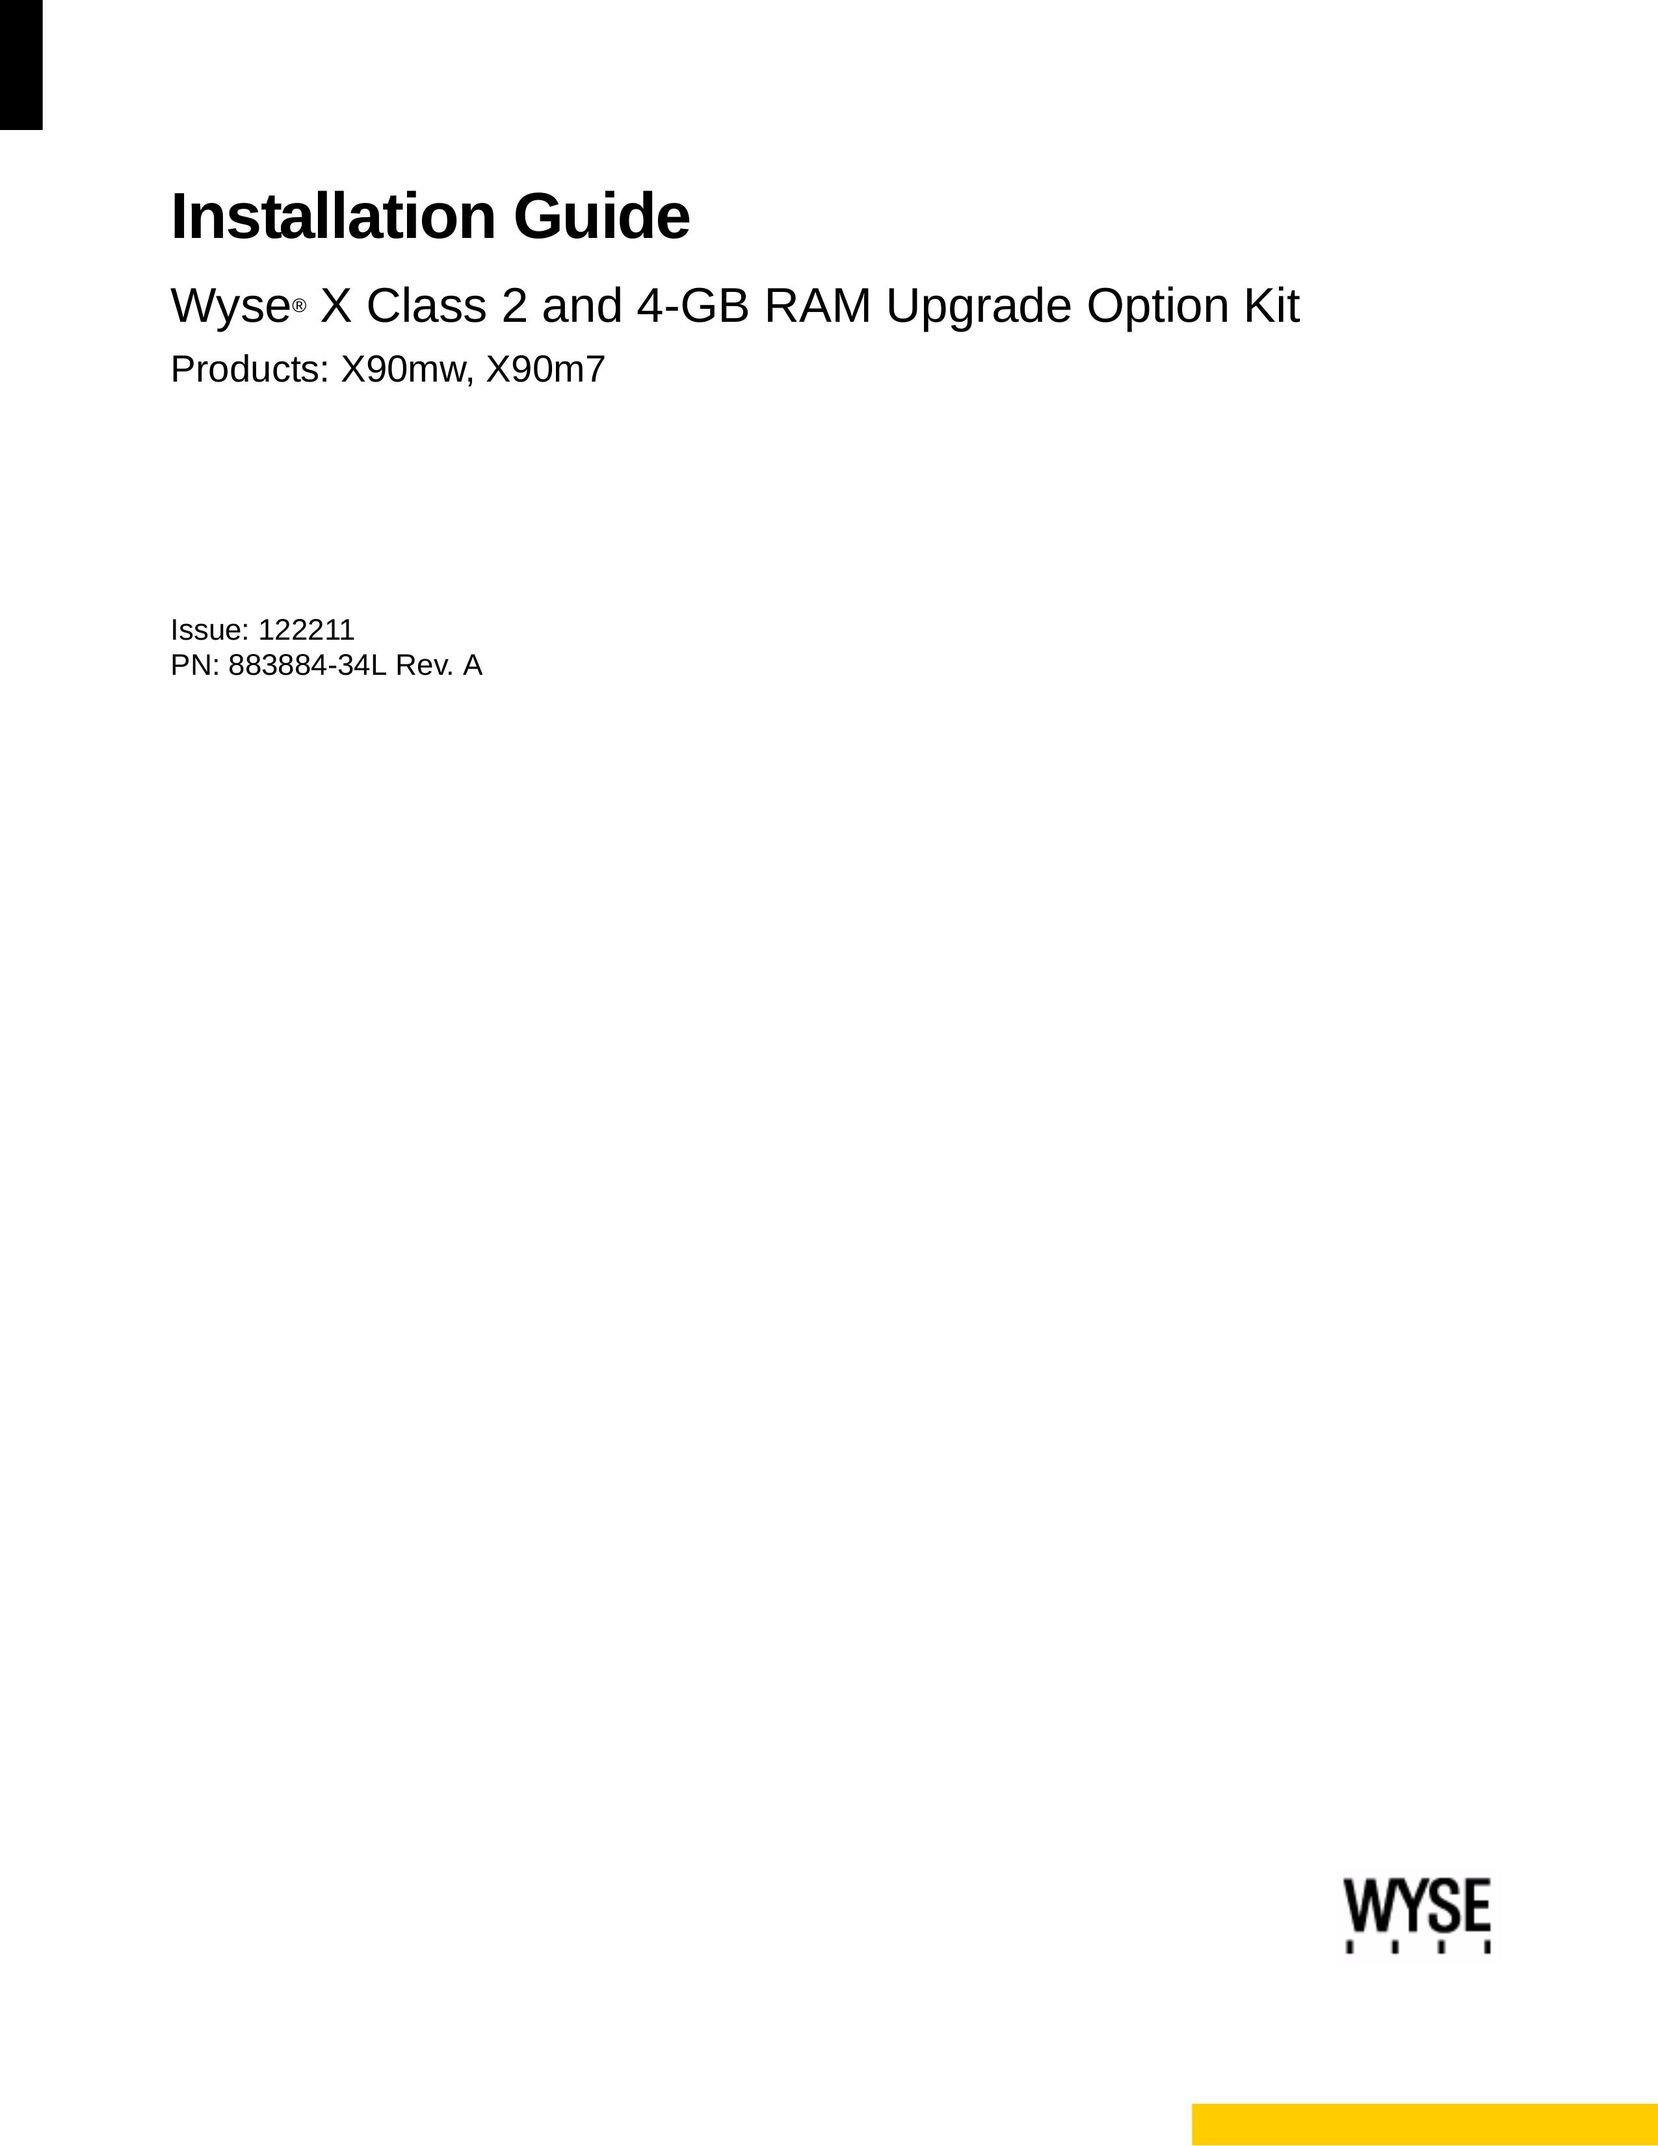 Wyse Technology wyse x class 2 and 4-gb ram upgrade option kit Universal Remote User Manual